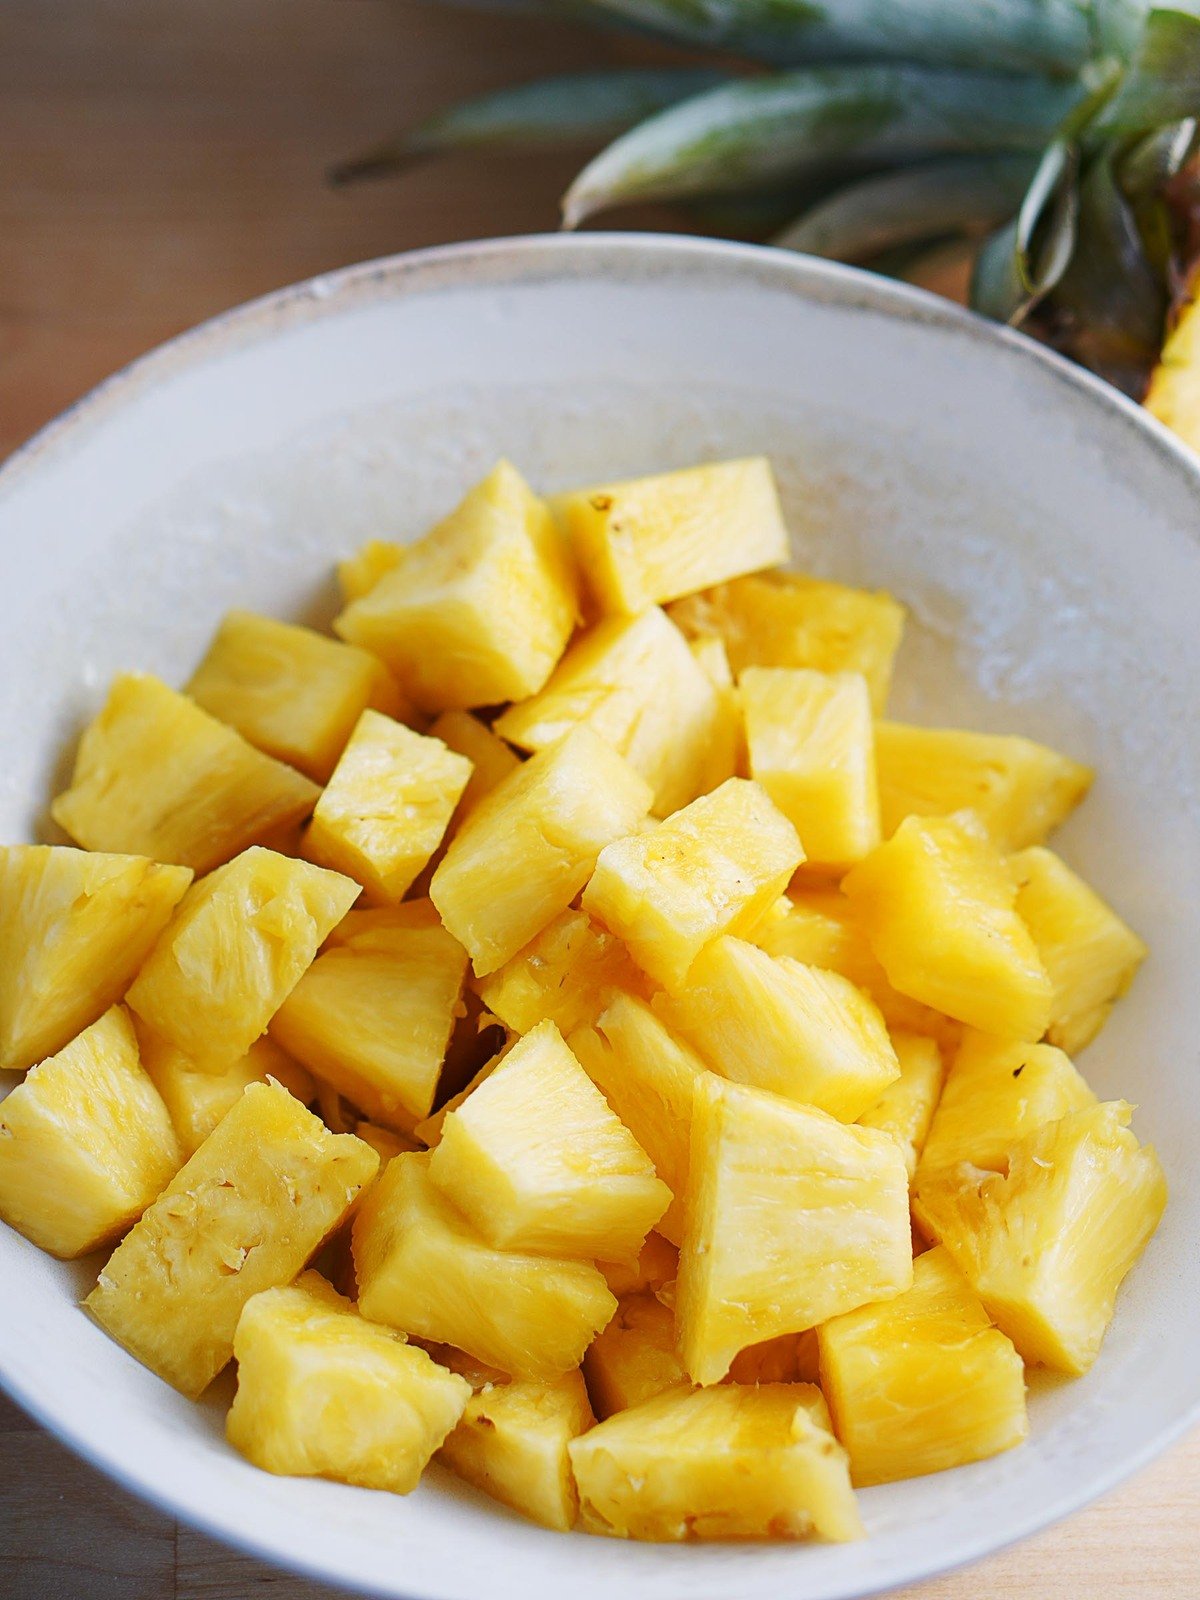 A white bowl of pineapple cubes.